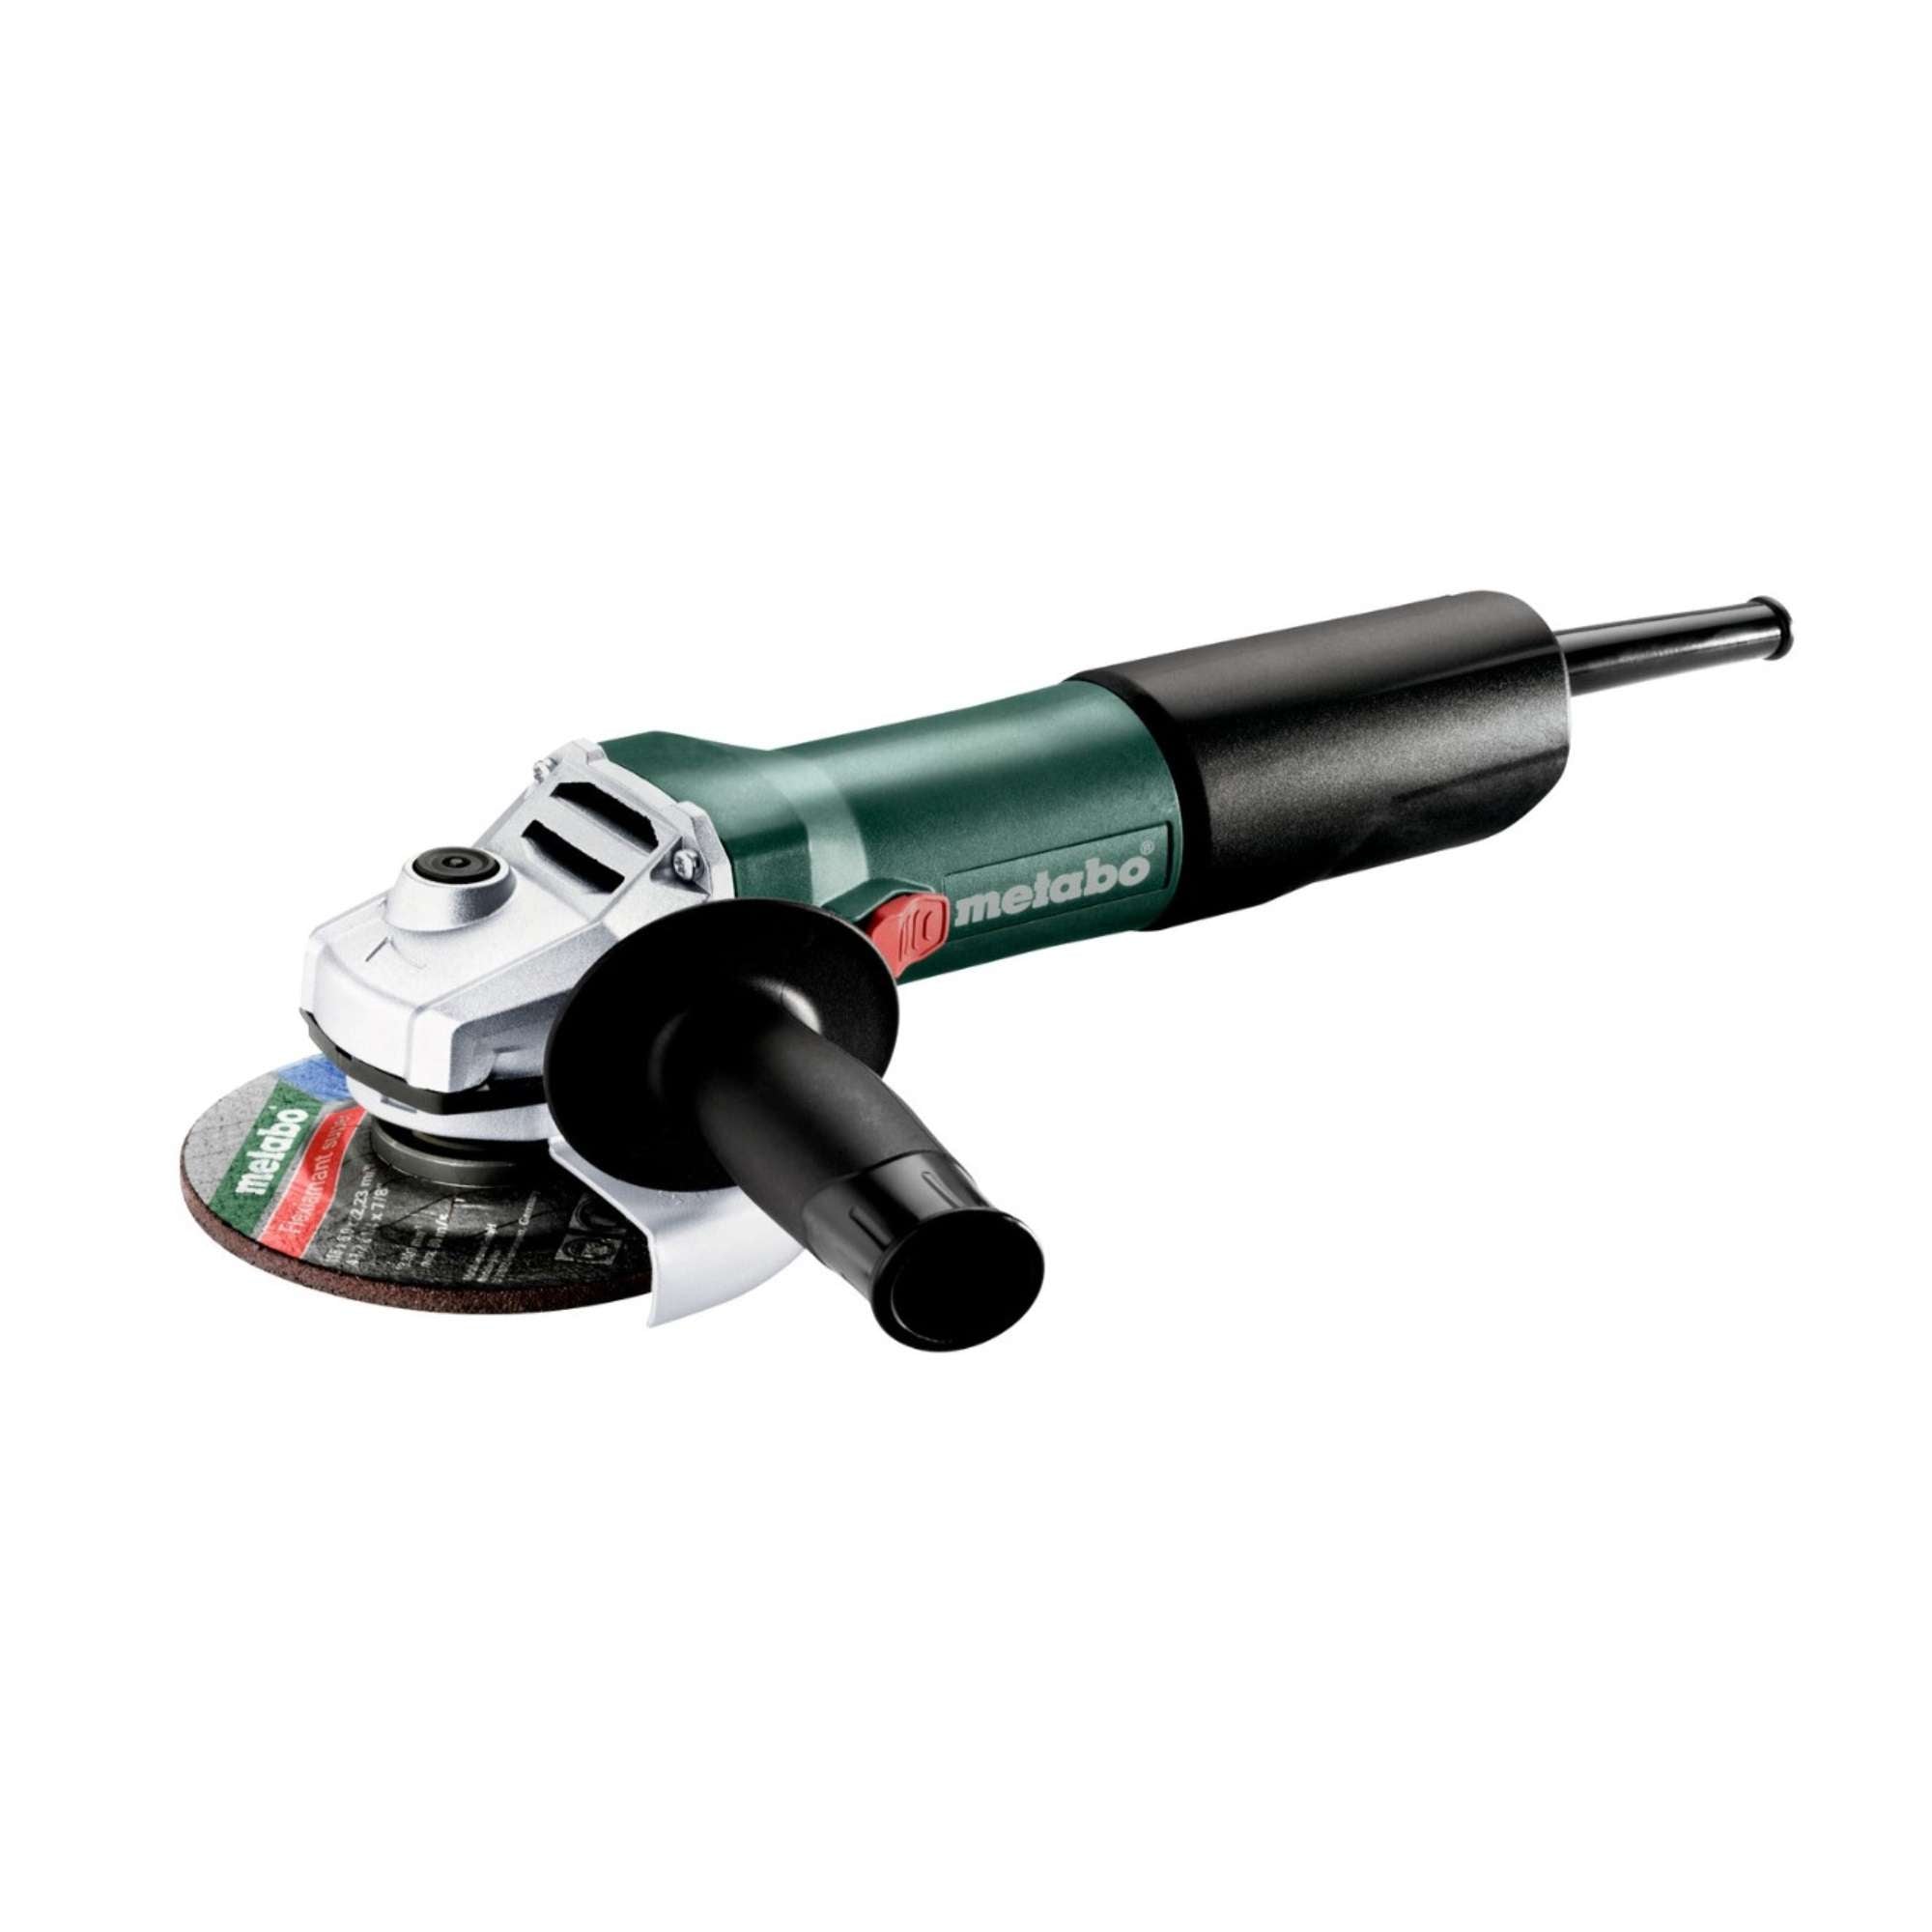 Angle Grinder 115mm 850W - Metabo W 850-115 603607000